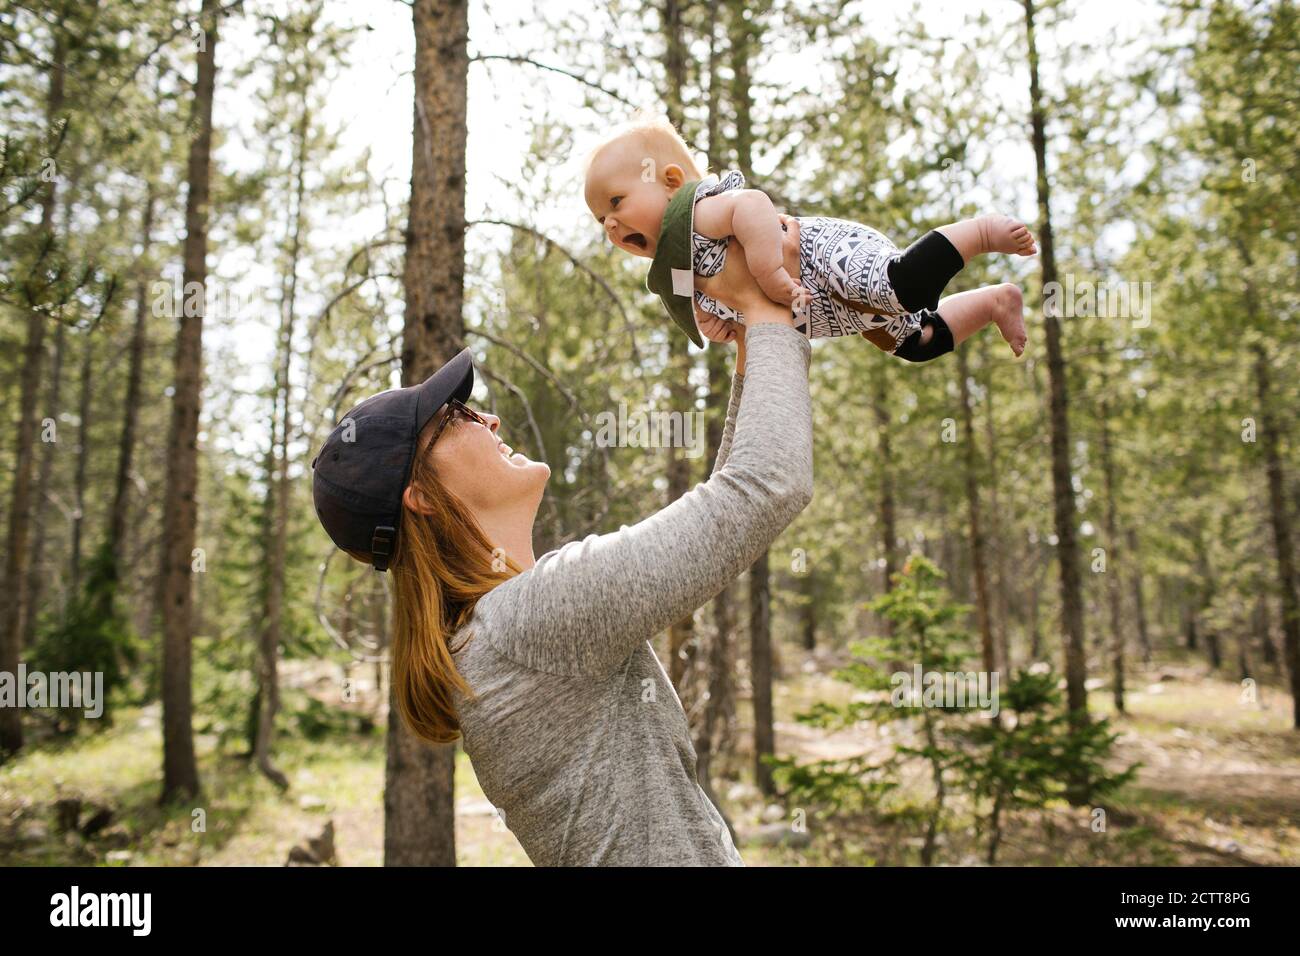 Smiling woman playing with baby son (6-11 months) in forest, Wasatch-Cache National Forest Stock Photo